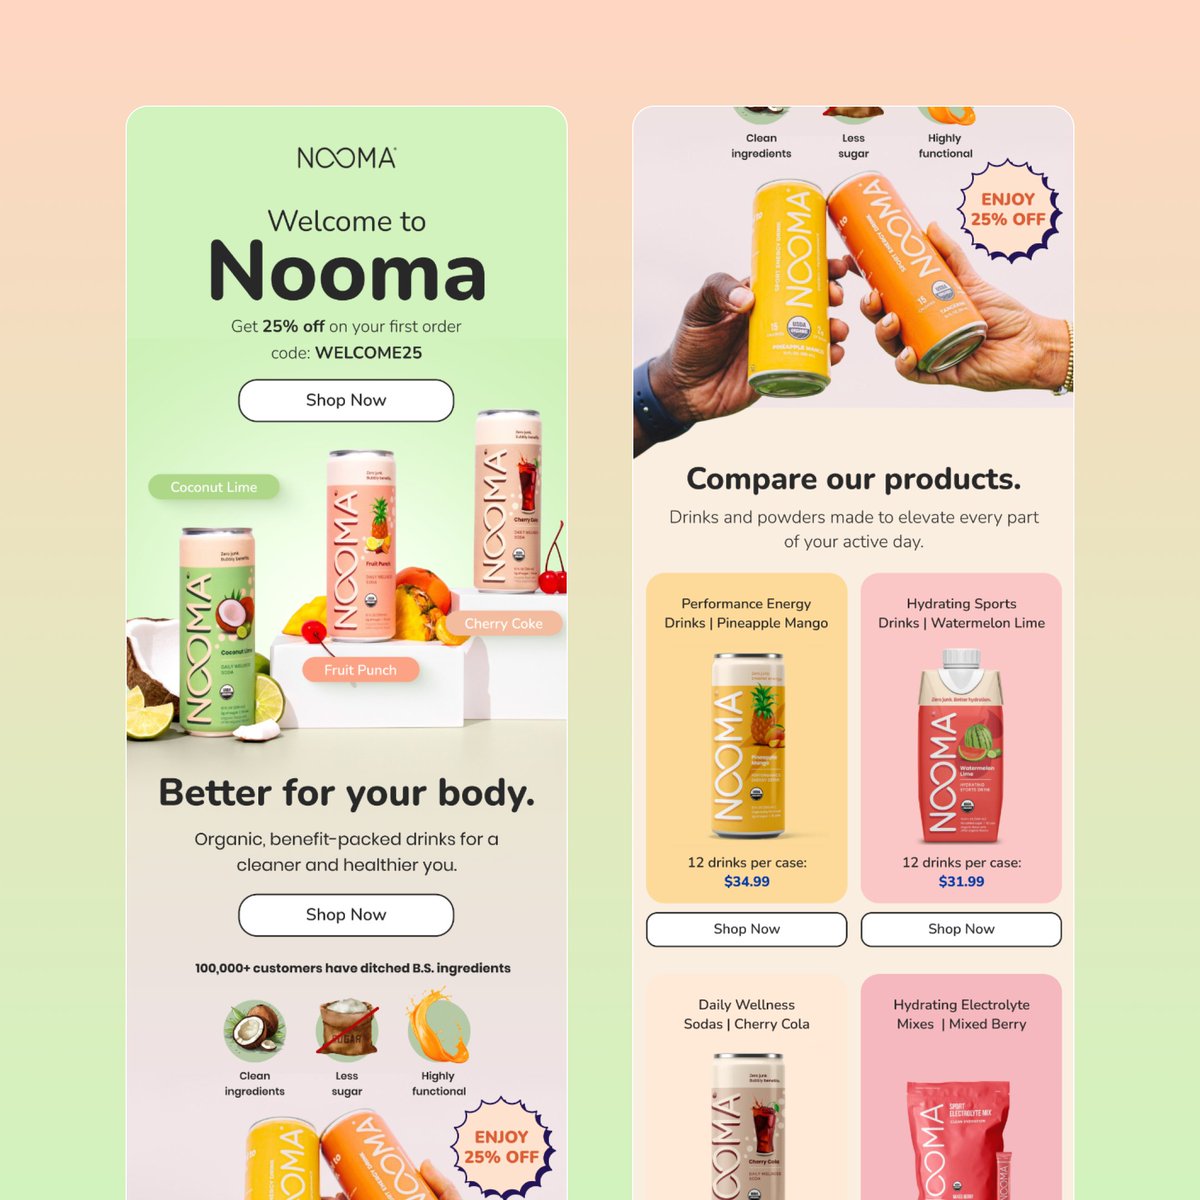 I personally love this brand, It makes me thirsty!

#emaildesign #EmailMarketing #ecommerce #GraphicDesigner